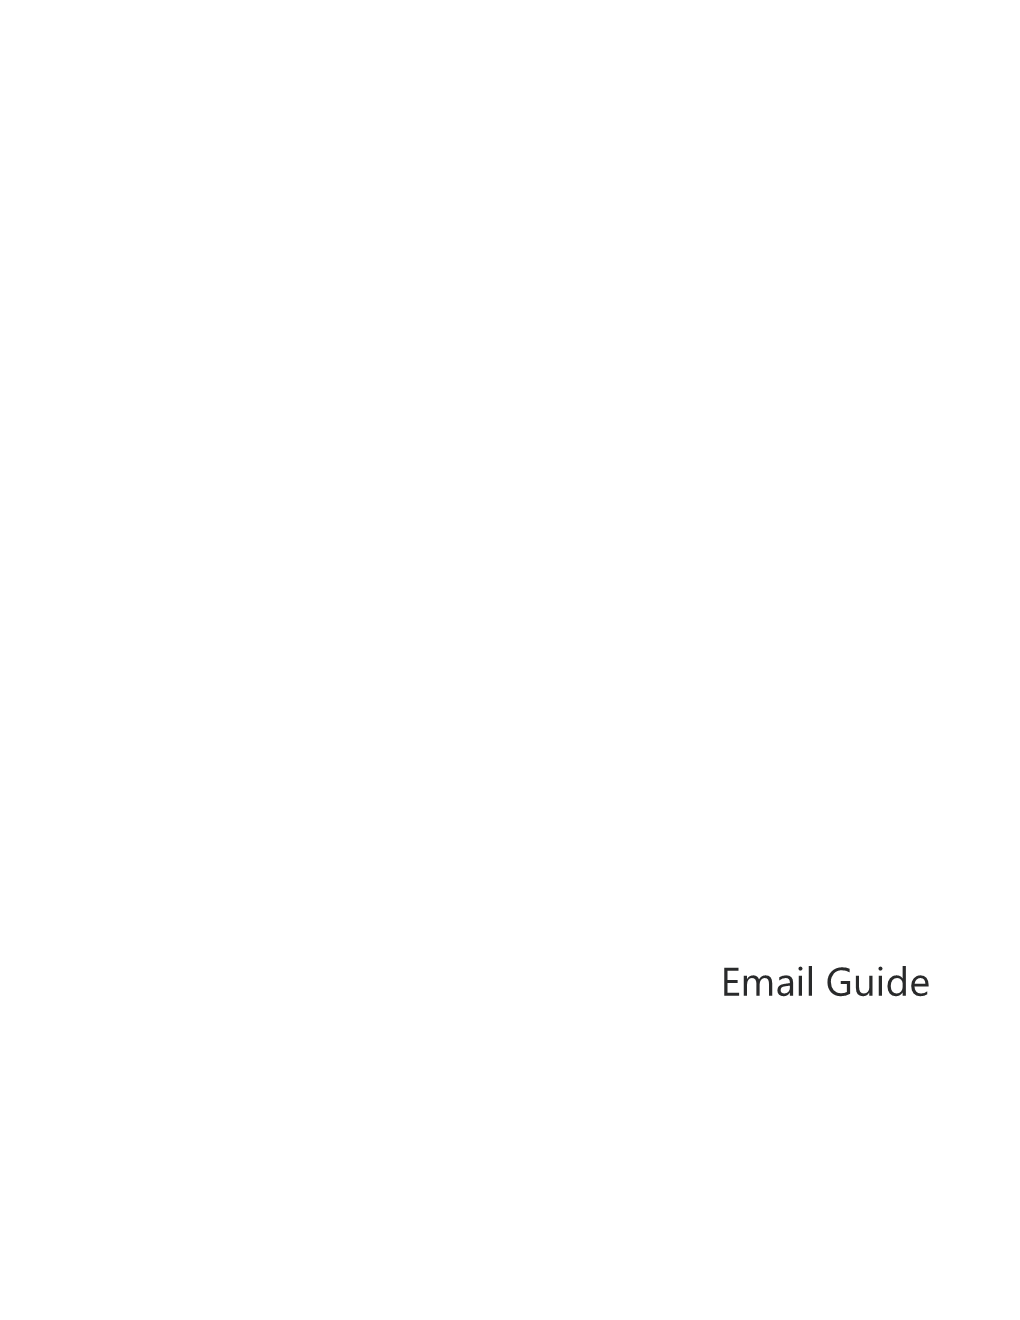 Blackbaud Internet Solutions Email Guide